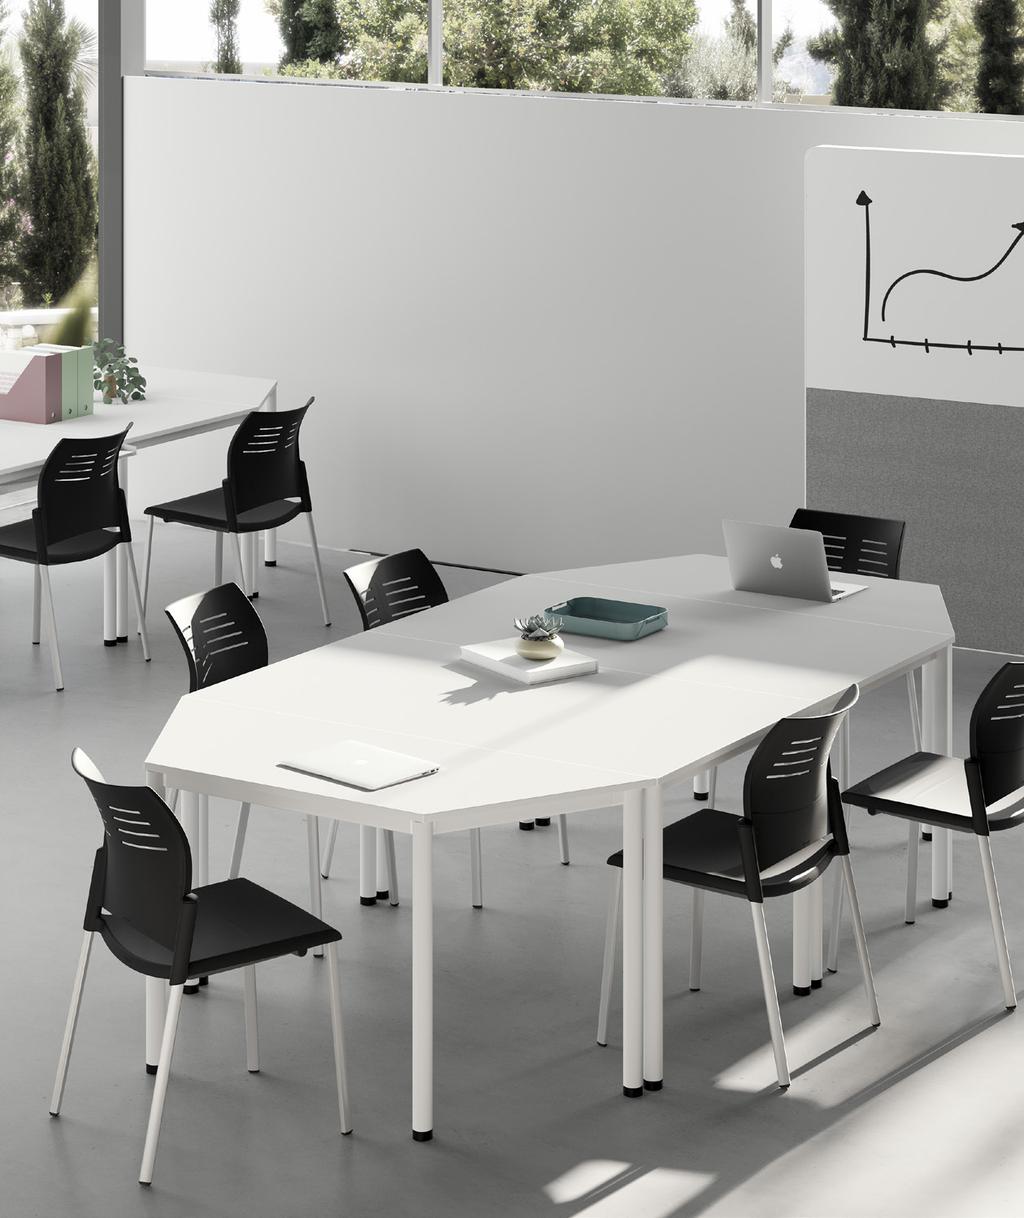 The range s joining modules enable the creation of straight (90º) or trapezoidal (60º and 120º) shapes to configure customised classrooms or meeting rooms, with designs that give the space a unique